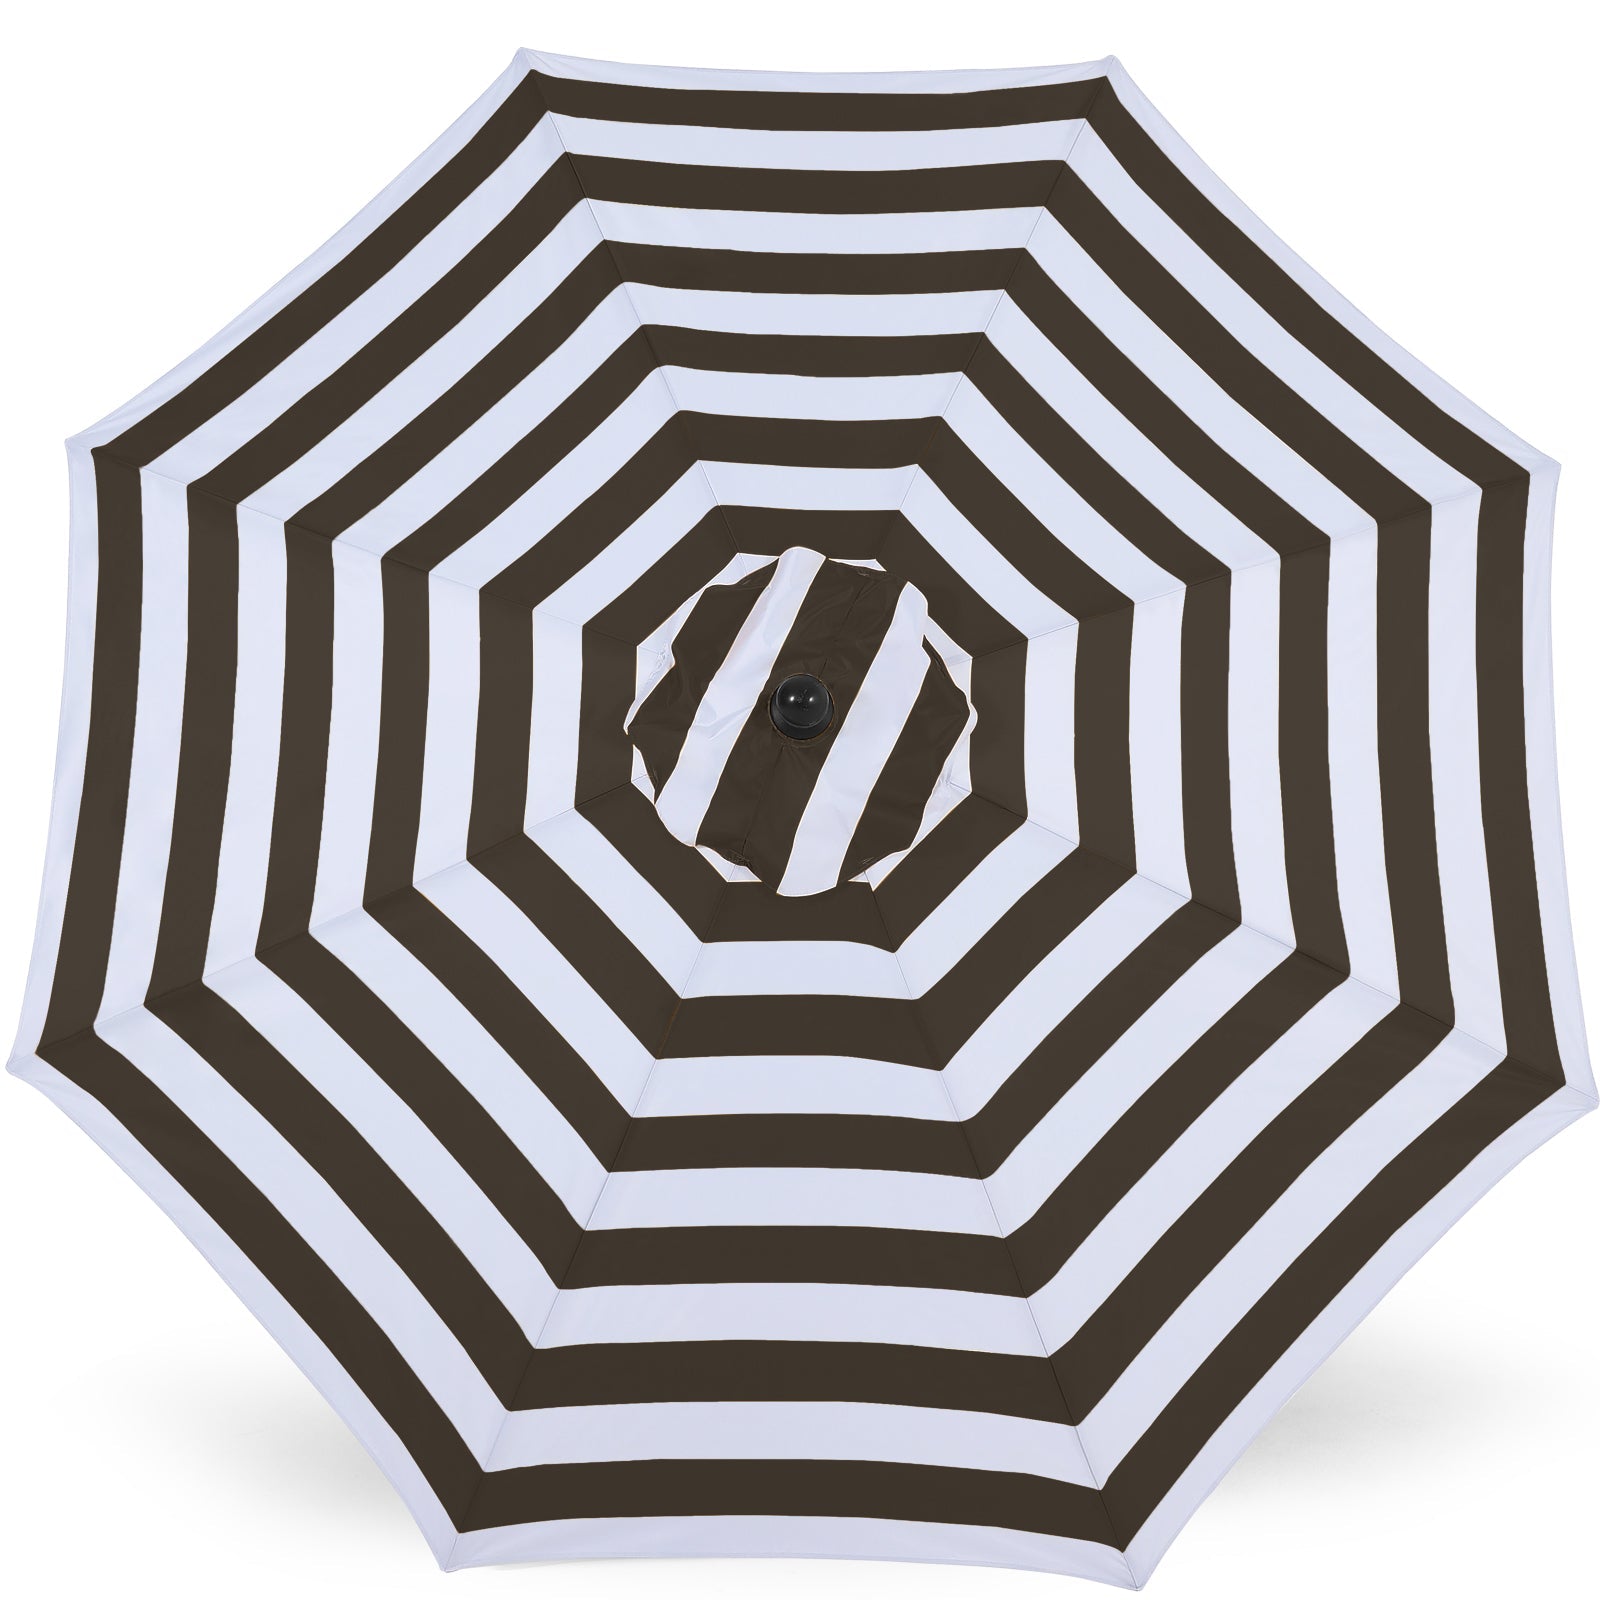 9FT Patterned Replacement Top for Outdoor Umbrella 8 Ribs